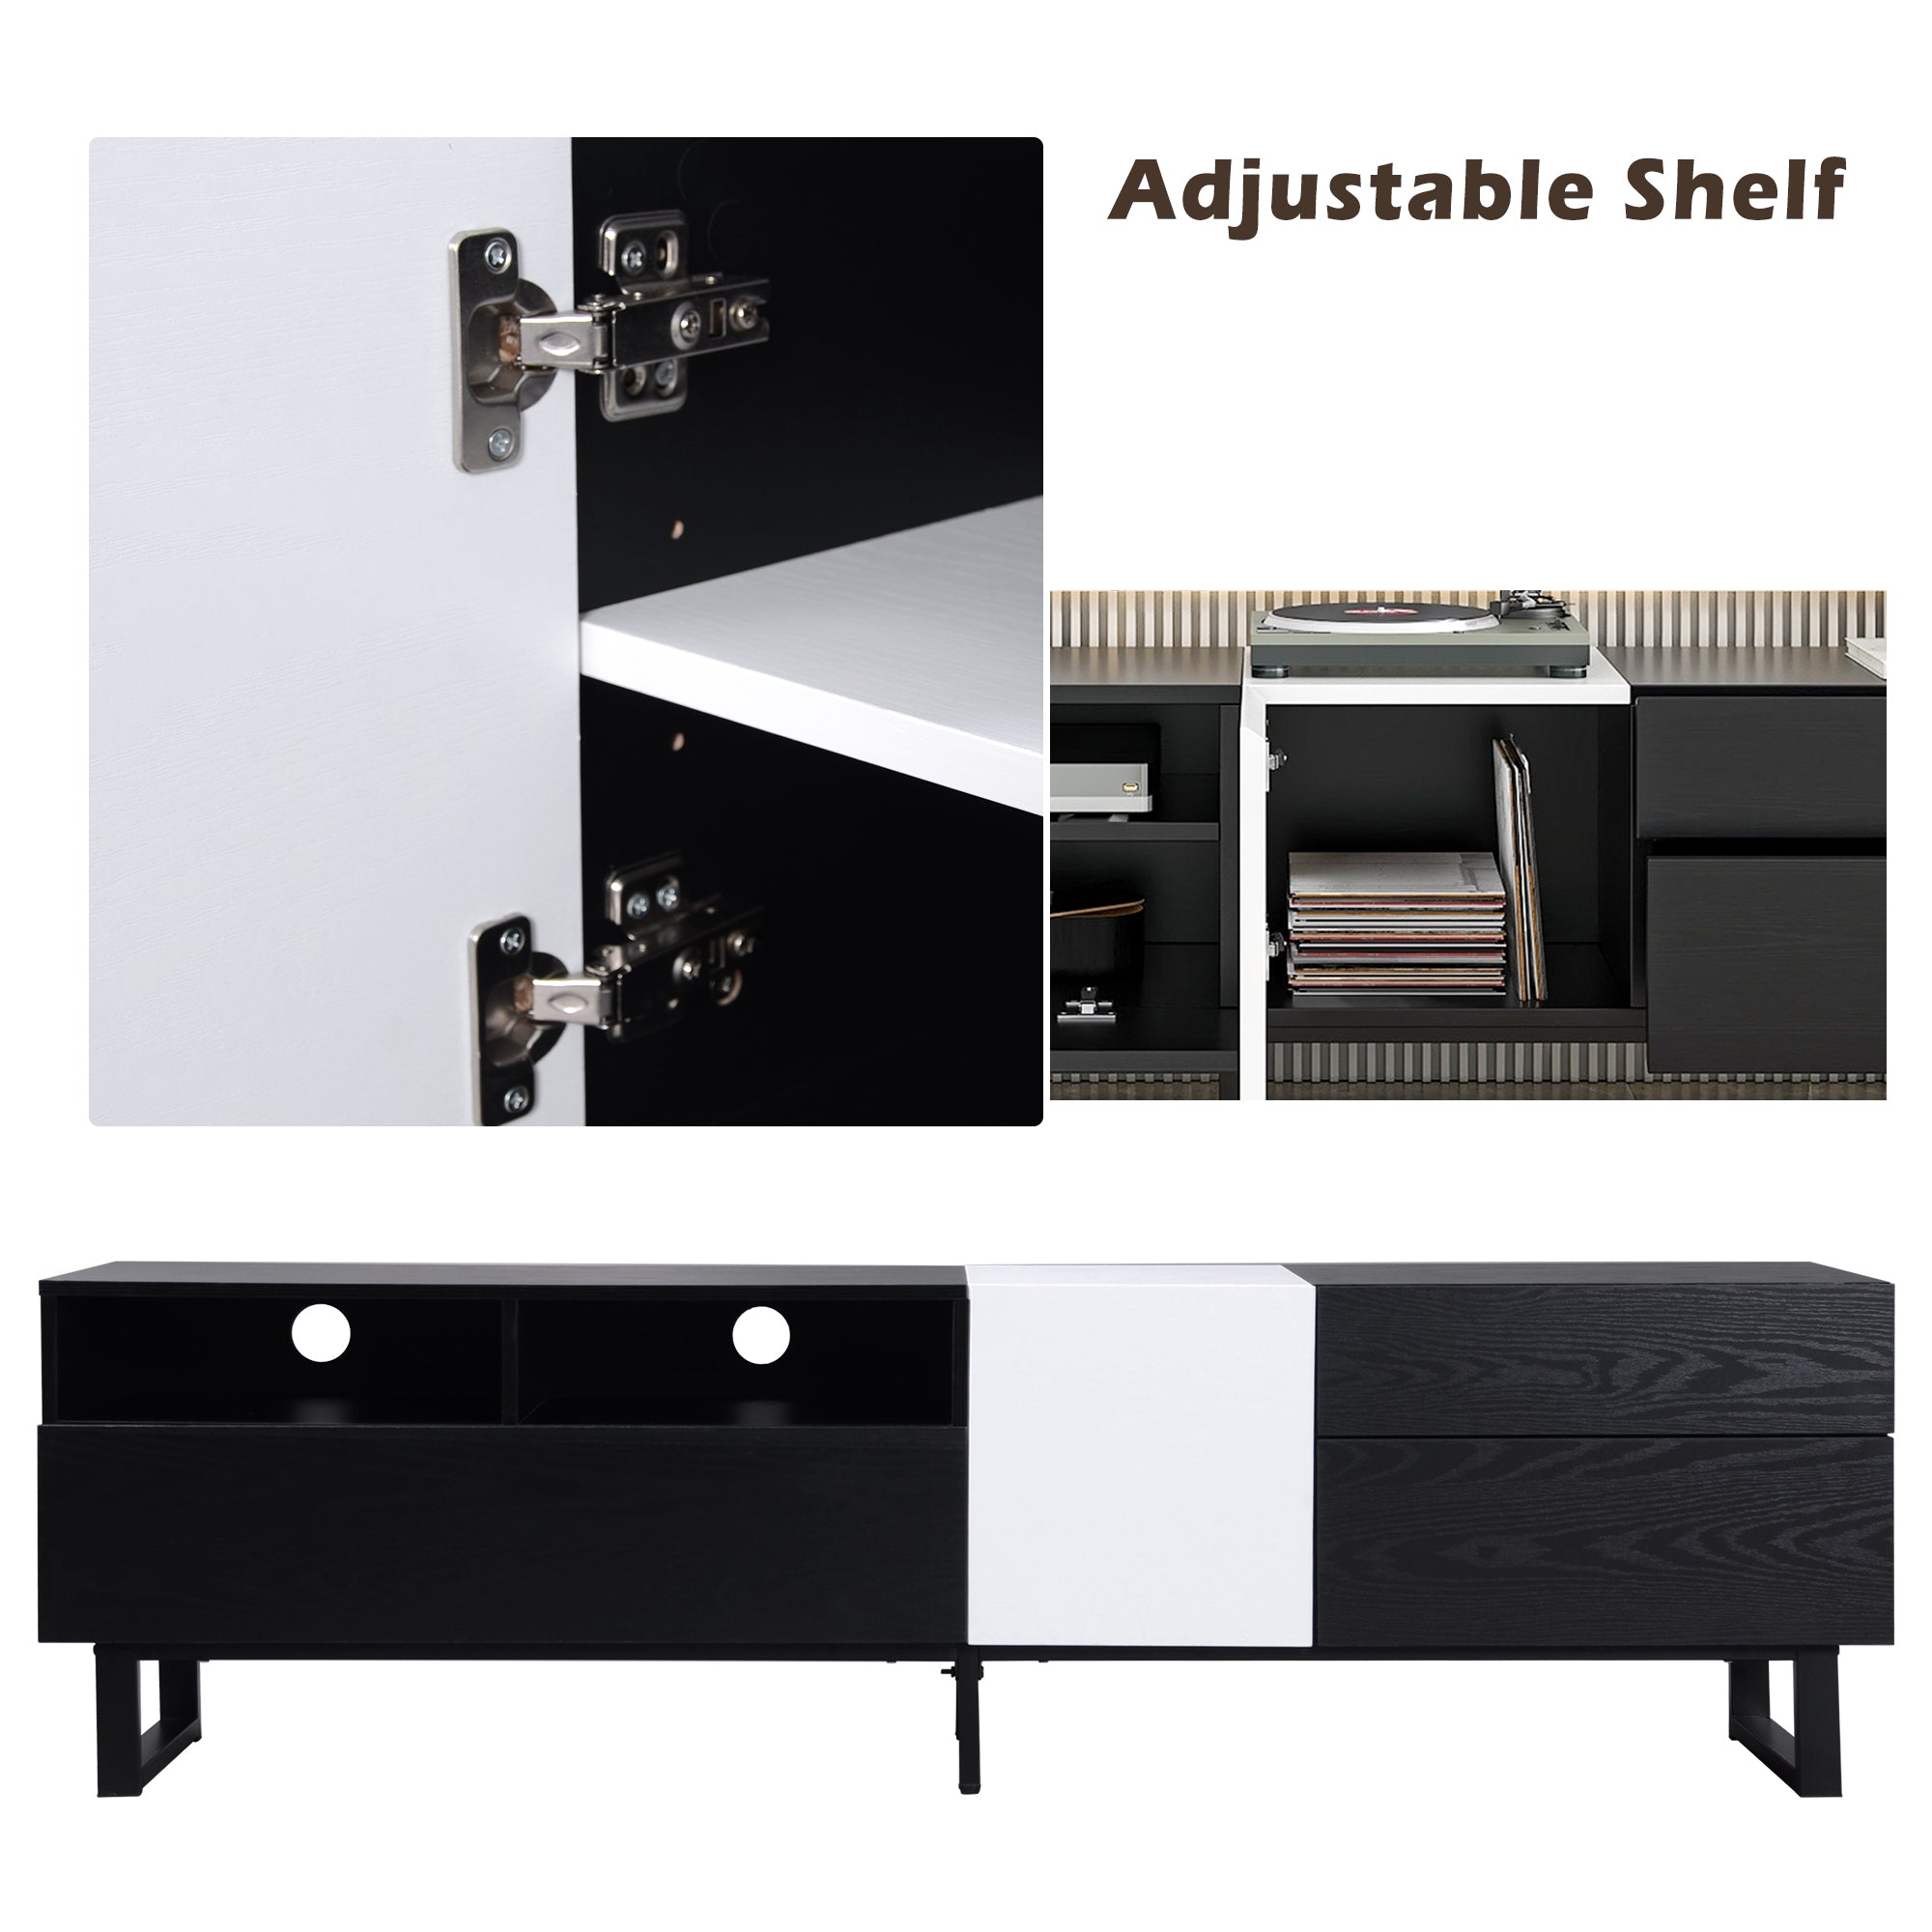 Modern TV Stand for 80'' TV with Double Storage Space, Media Console Table - Black